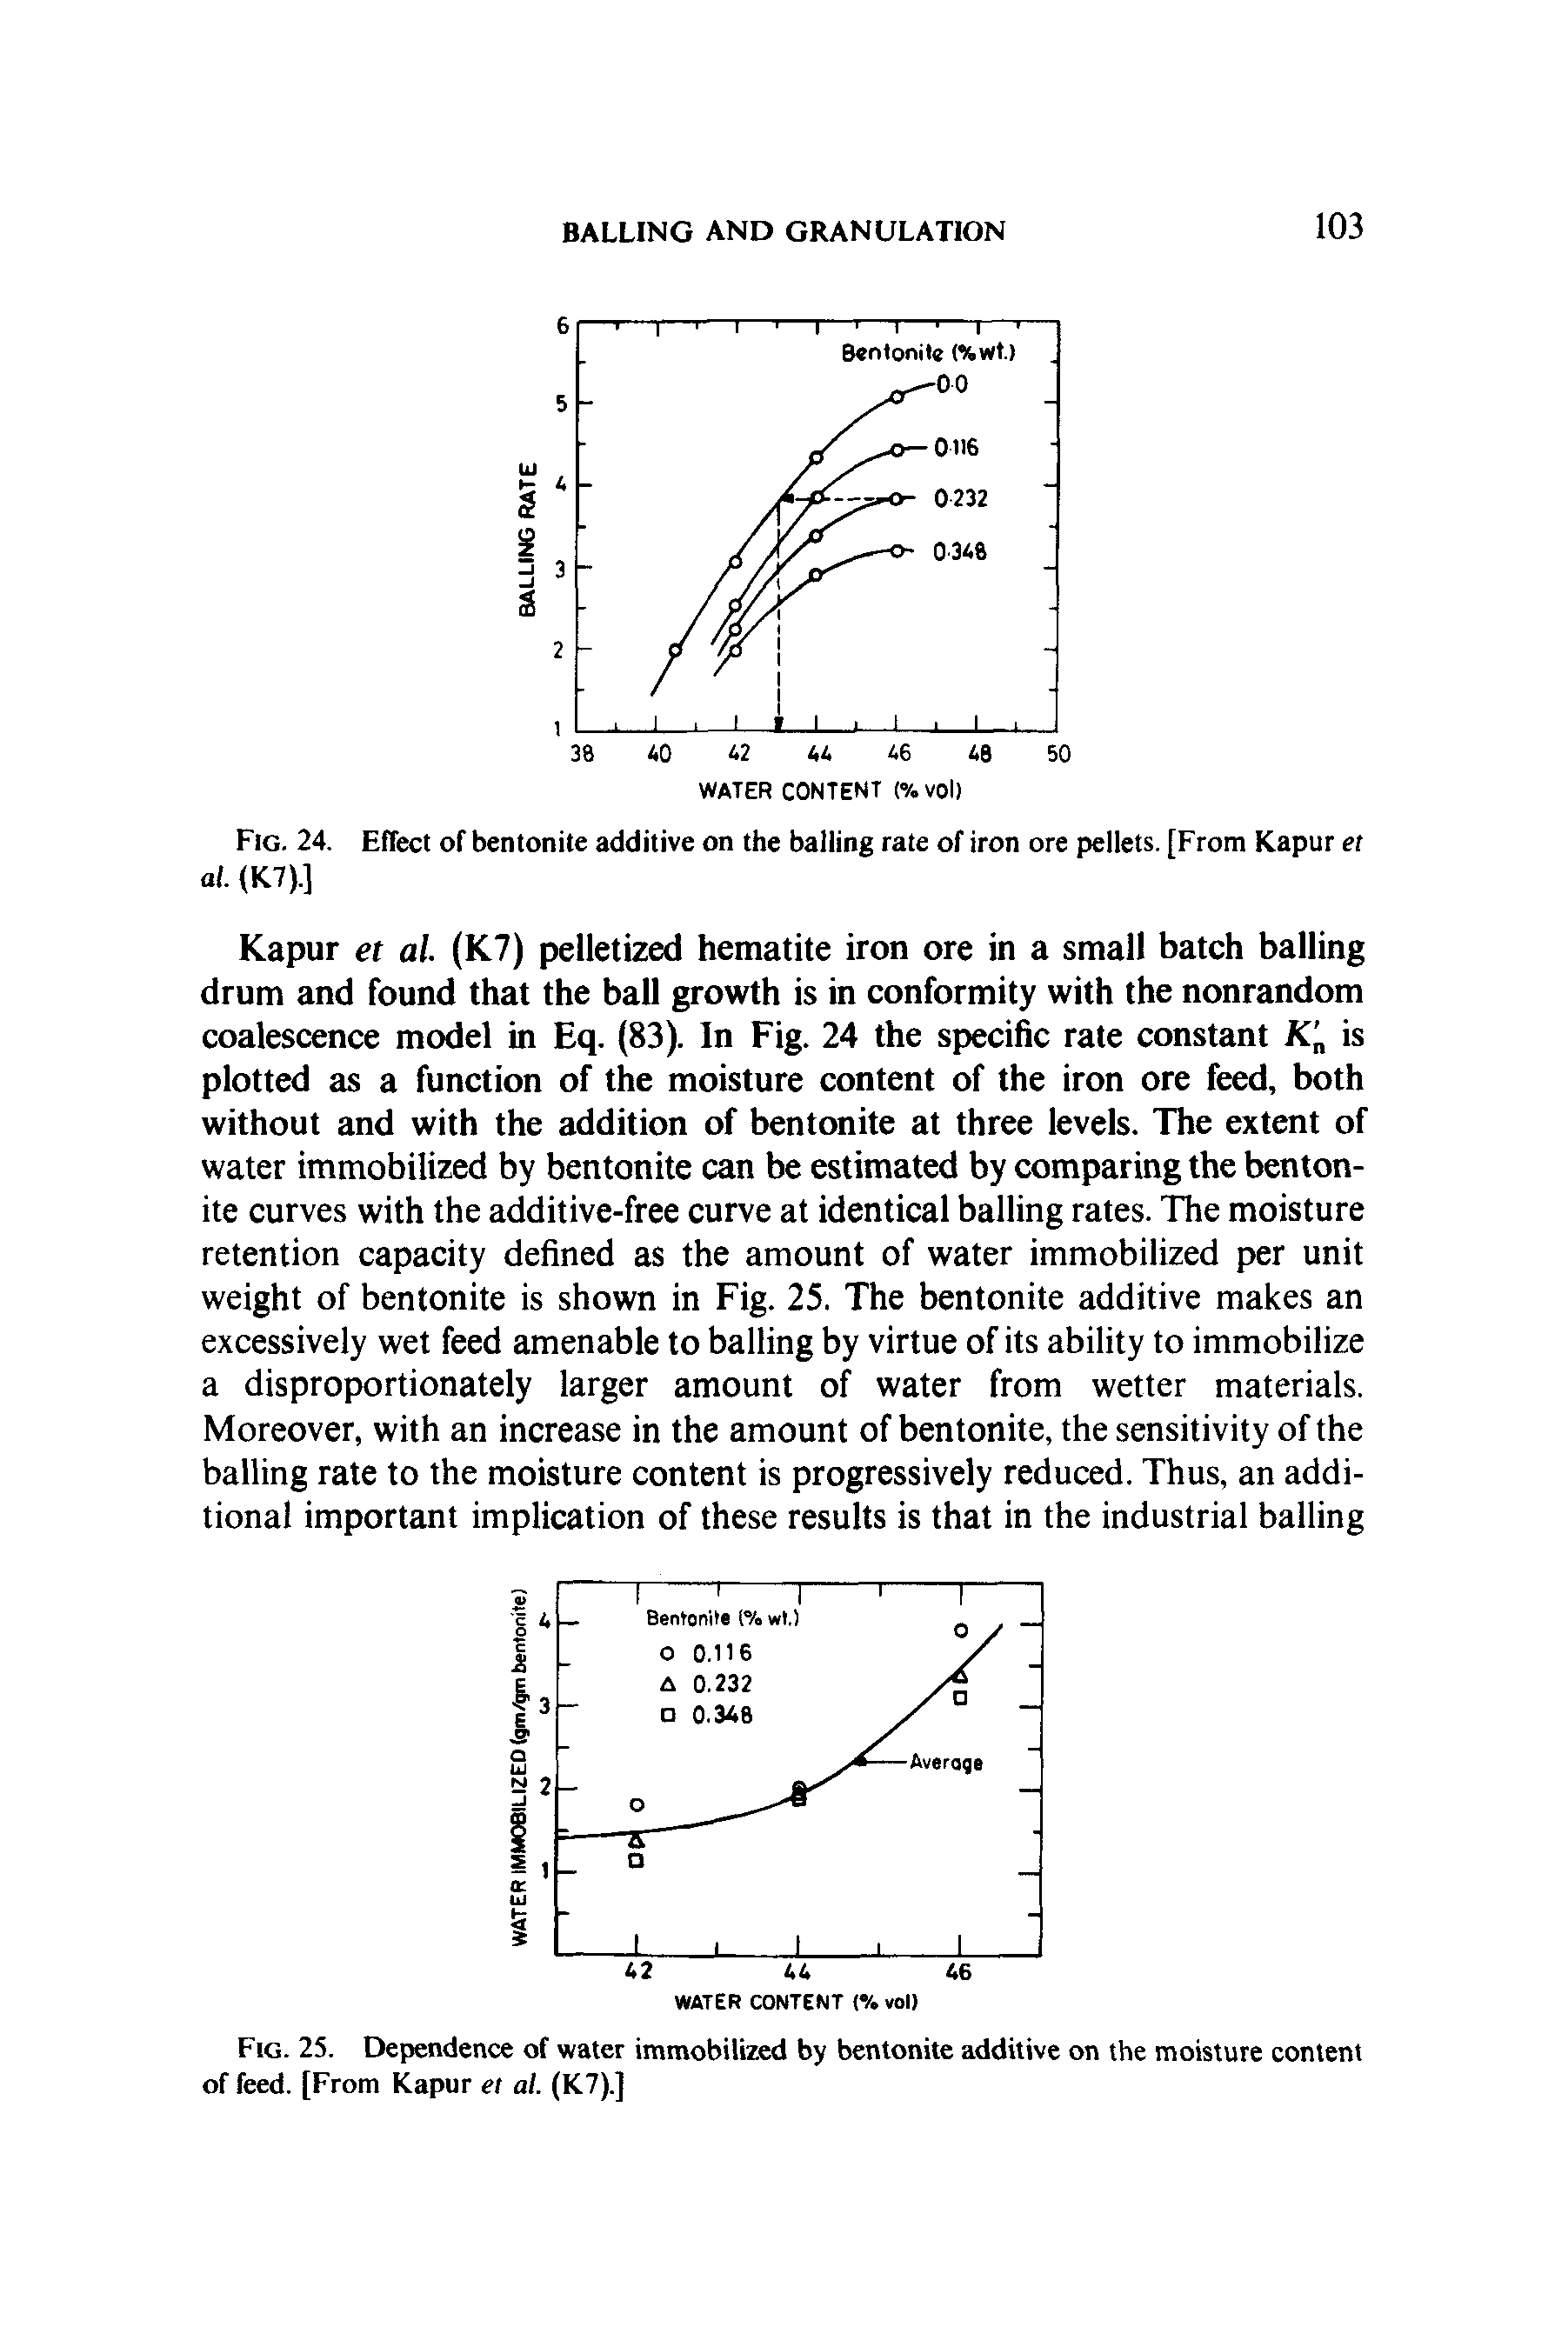 Fig. 24. Effect of bentonite additive on the balling rate of iron ore pellets. [From Kapur et al. (K7).]...